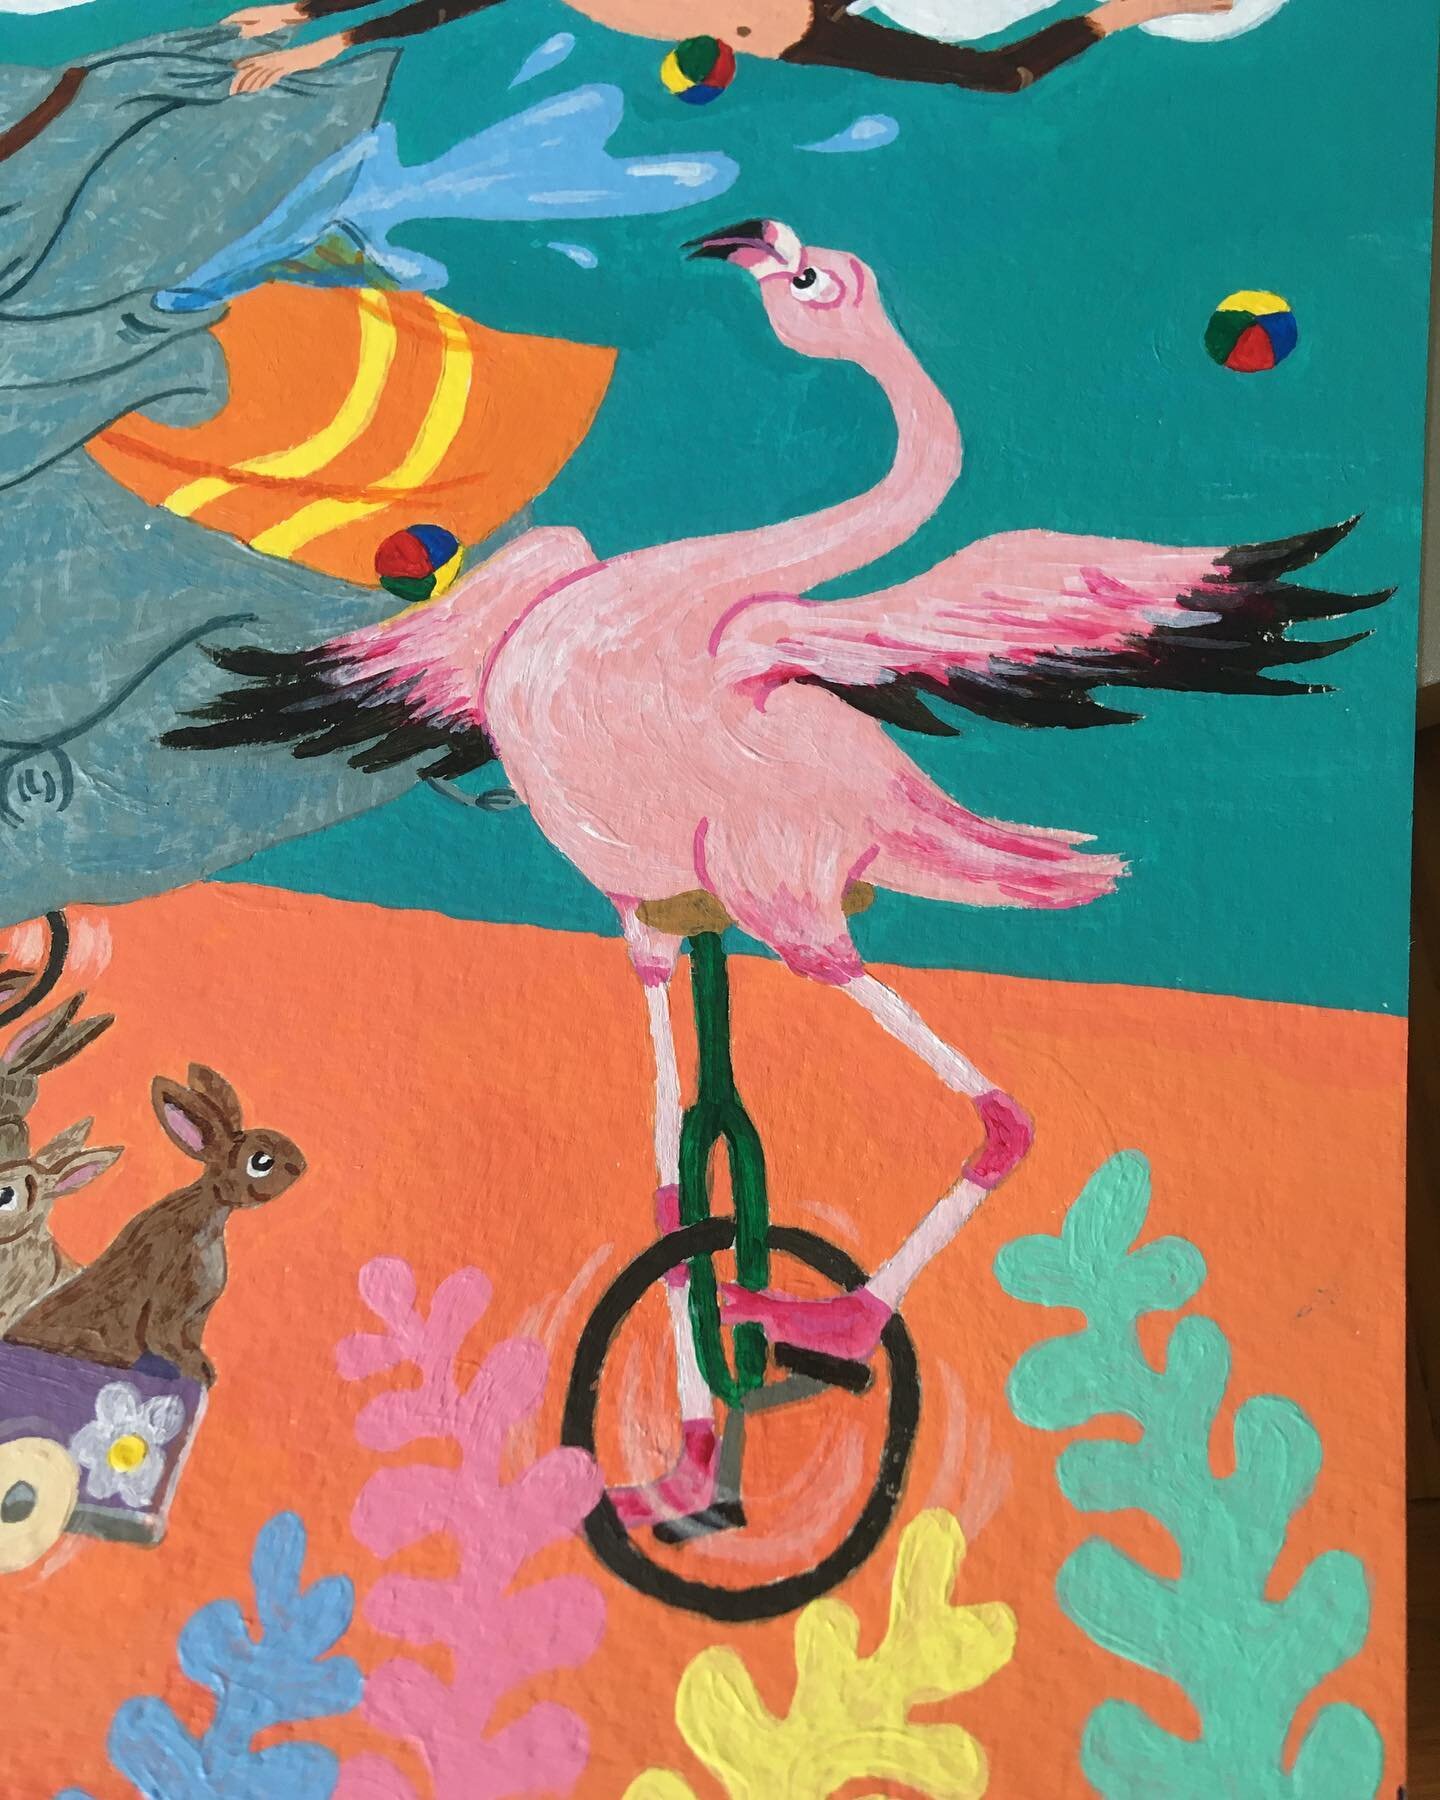 &ldquo;I&rsquo;m just a flamingo, juggling on a unicycle, asking him to love me&rdquo; #nottinghillquotesgonewrong